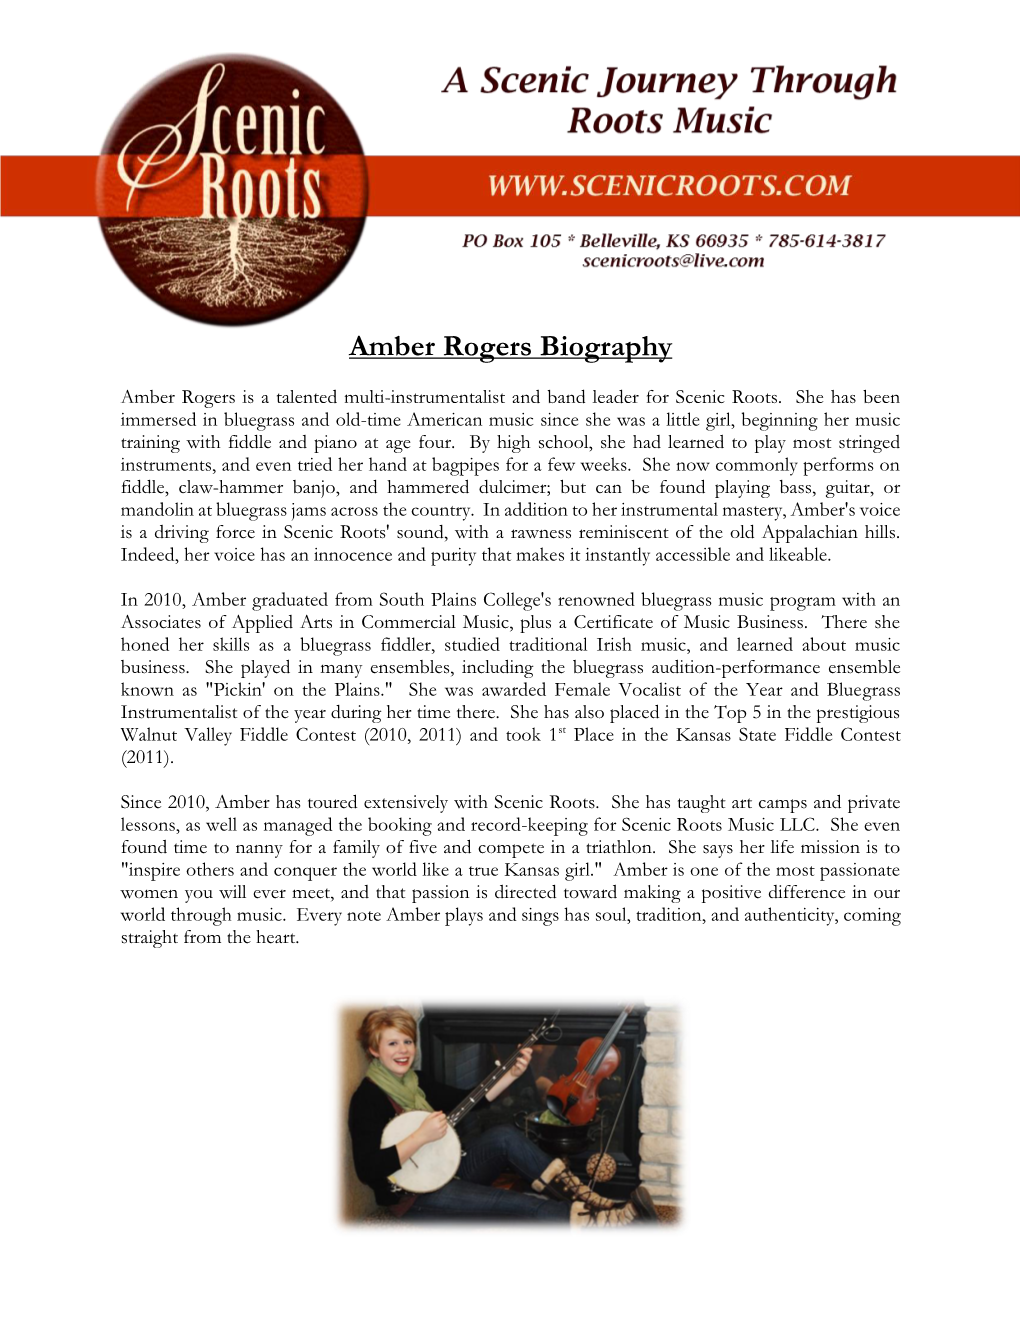 Amber Rogers Biography